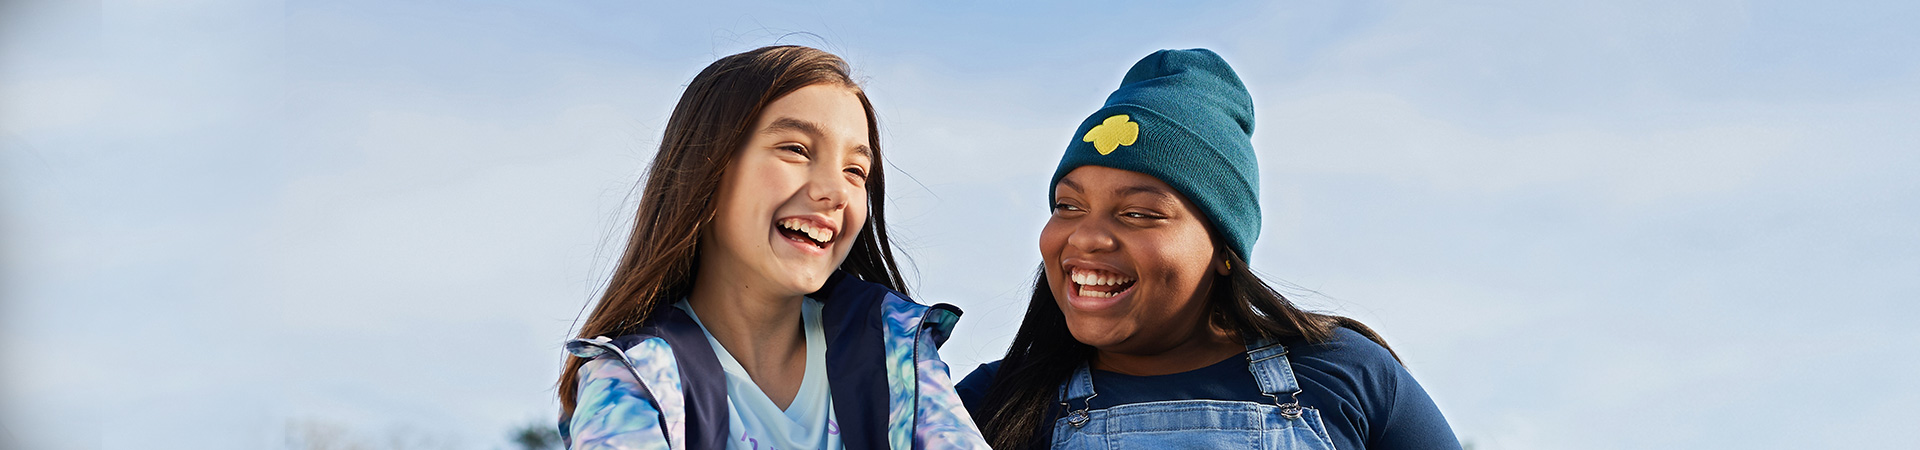  two girl scouts sitting outside laughing 